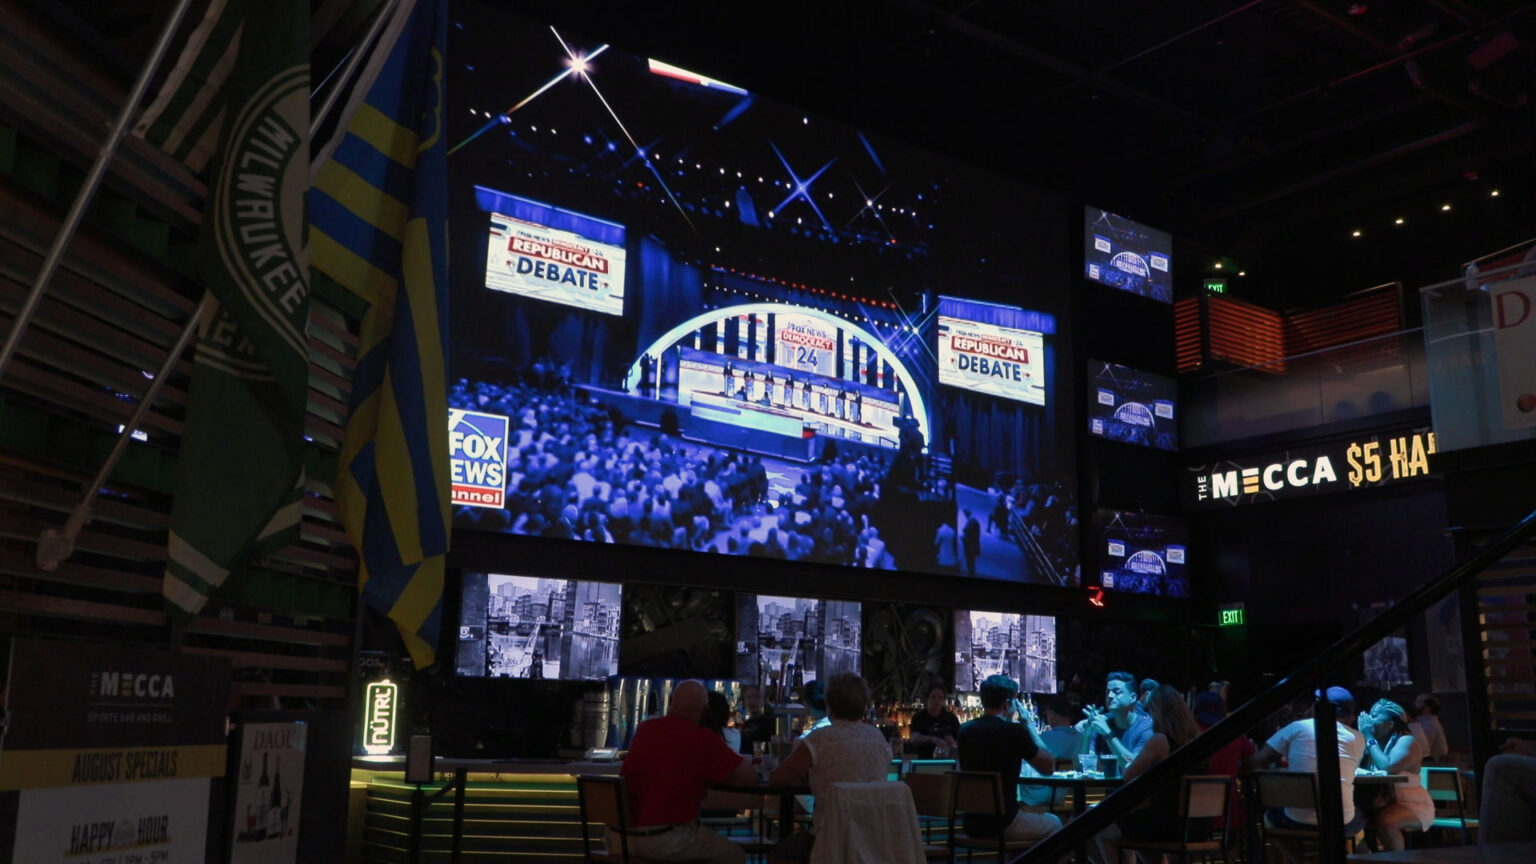 People sit at multiple tables underneath a large screen showing the FOX News Channel presentation of a presidential primary debate, in a room with multiple smaller television screens, a backlit sign reading The MECCA, and flags for the Milwaukee Bucks and Milwaukee Brewers.